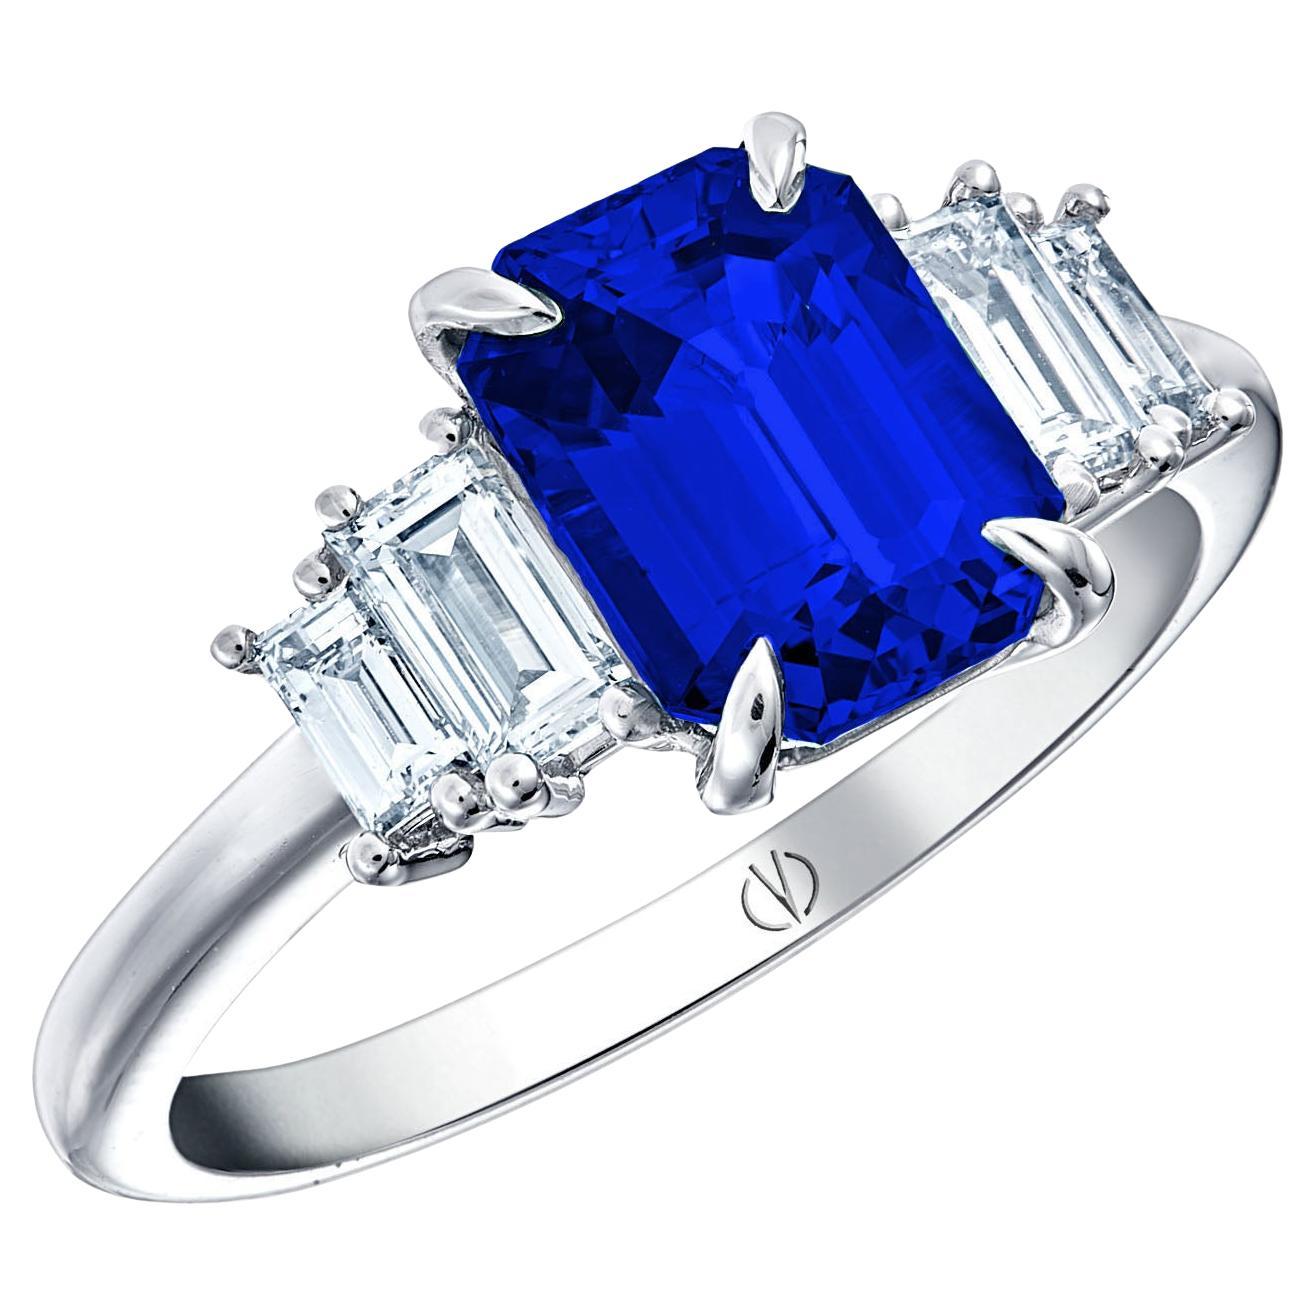 Art Deco Style 18k White Gold Ring With 2.65 Ct Royal Blue Emerald Cut Sapphire